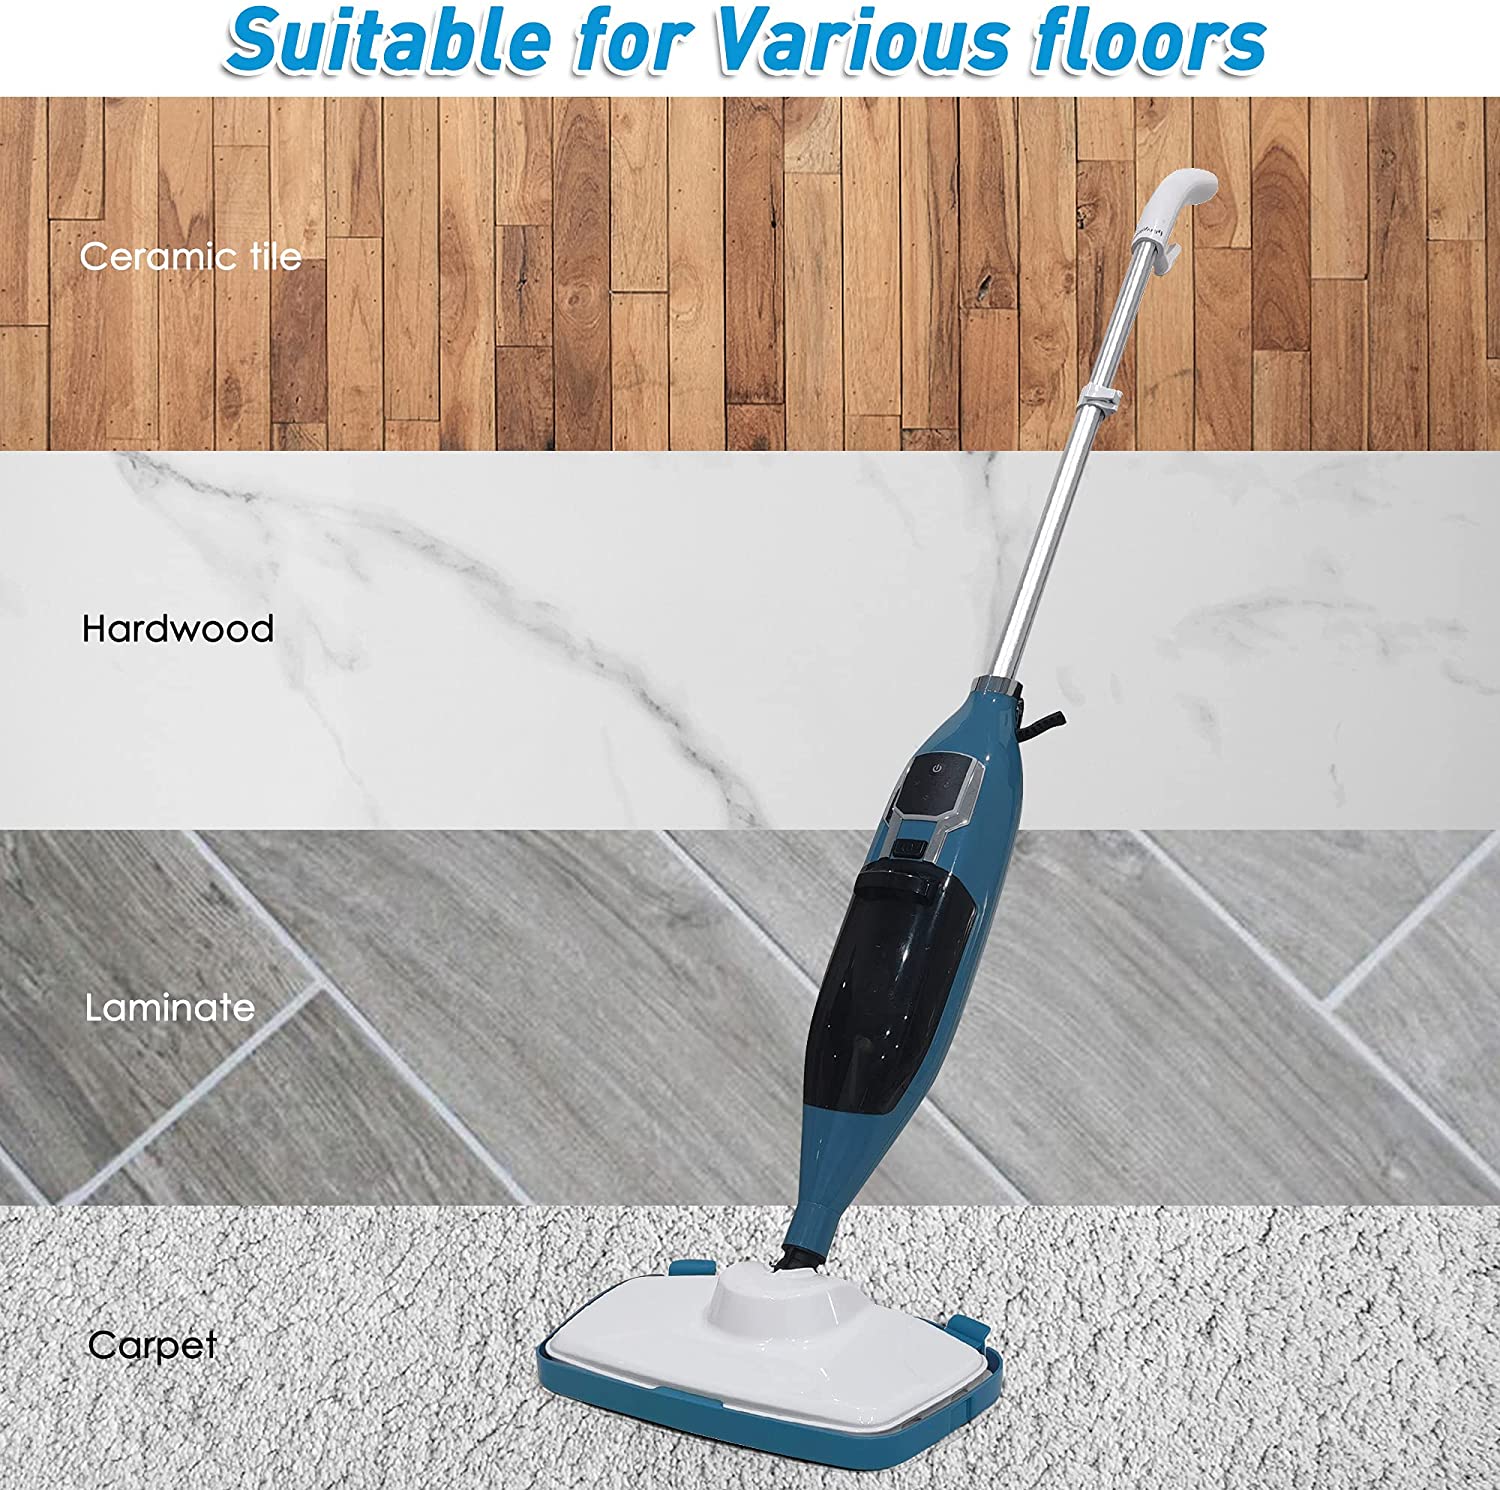 (Out of Stock) Steam Mop with 3 Steam Levels Hard Floor Cleaner, Adjustable Steamer with 550ml Water Tank and 2 Microfiber Pads